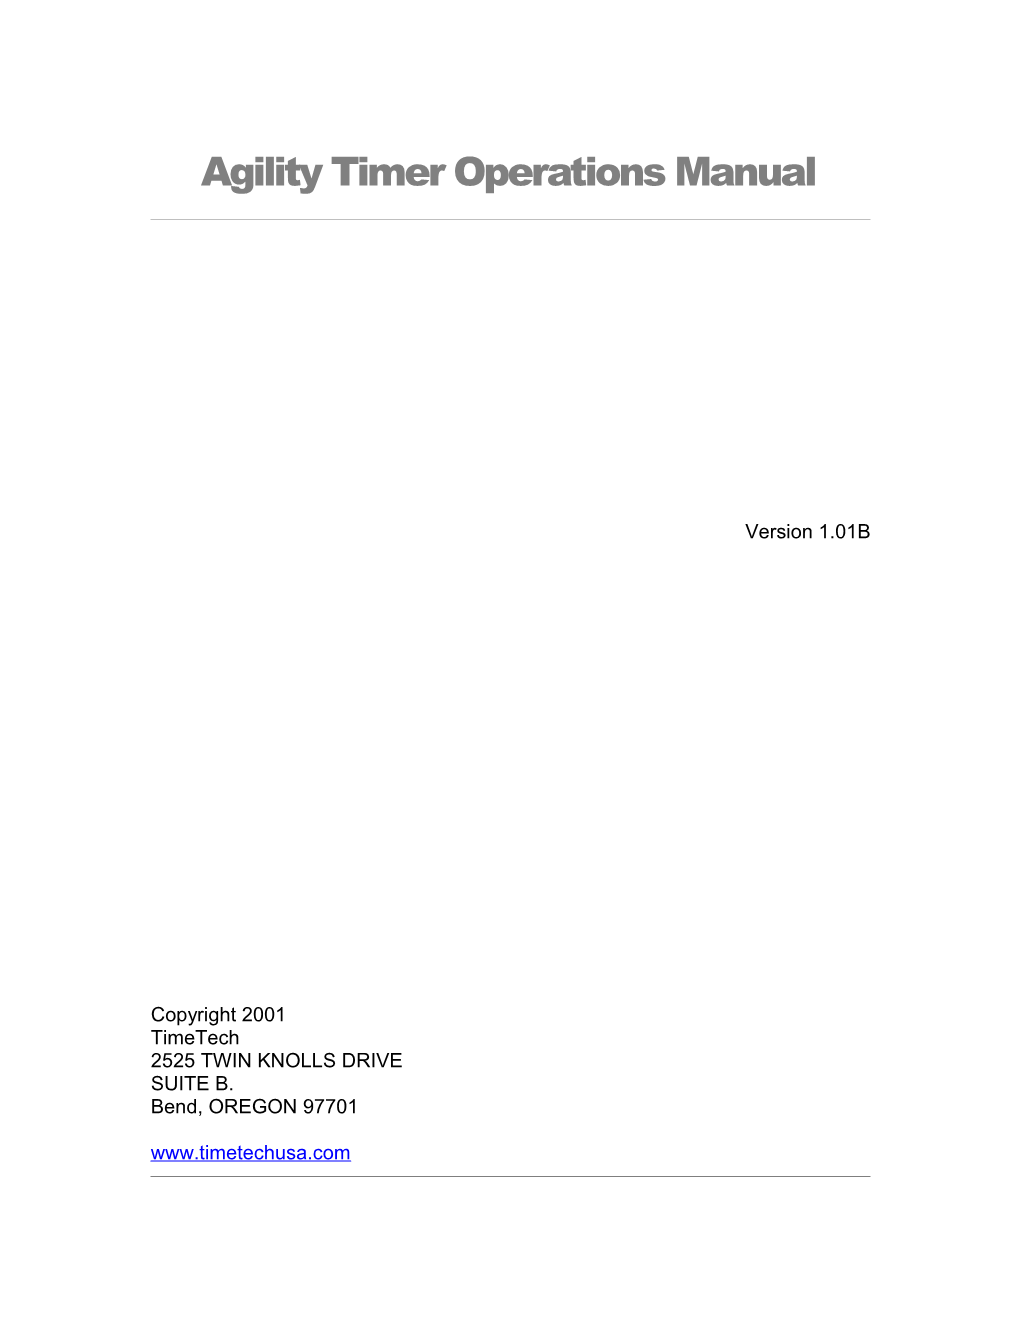 Agility Timer Operations Manual